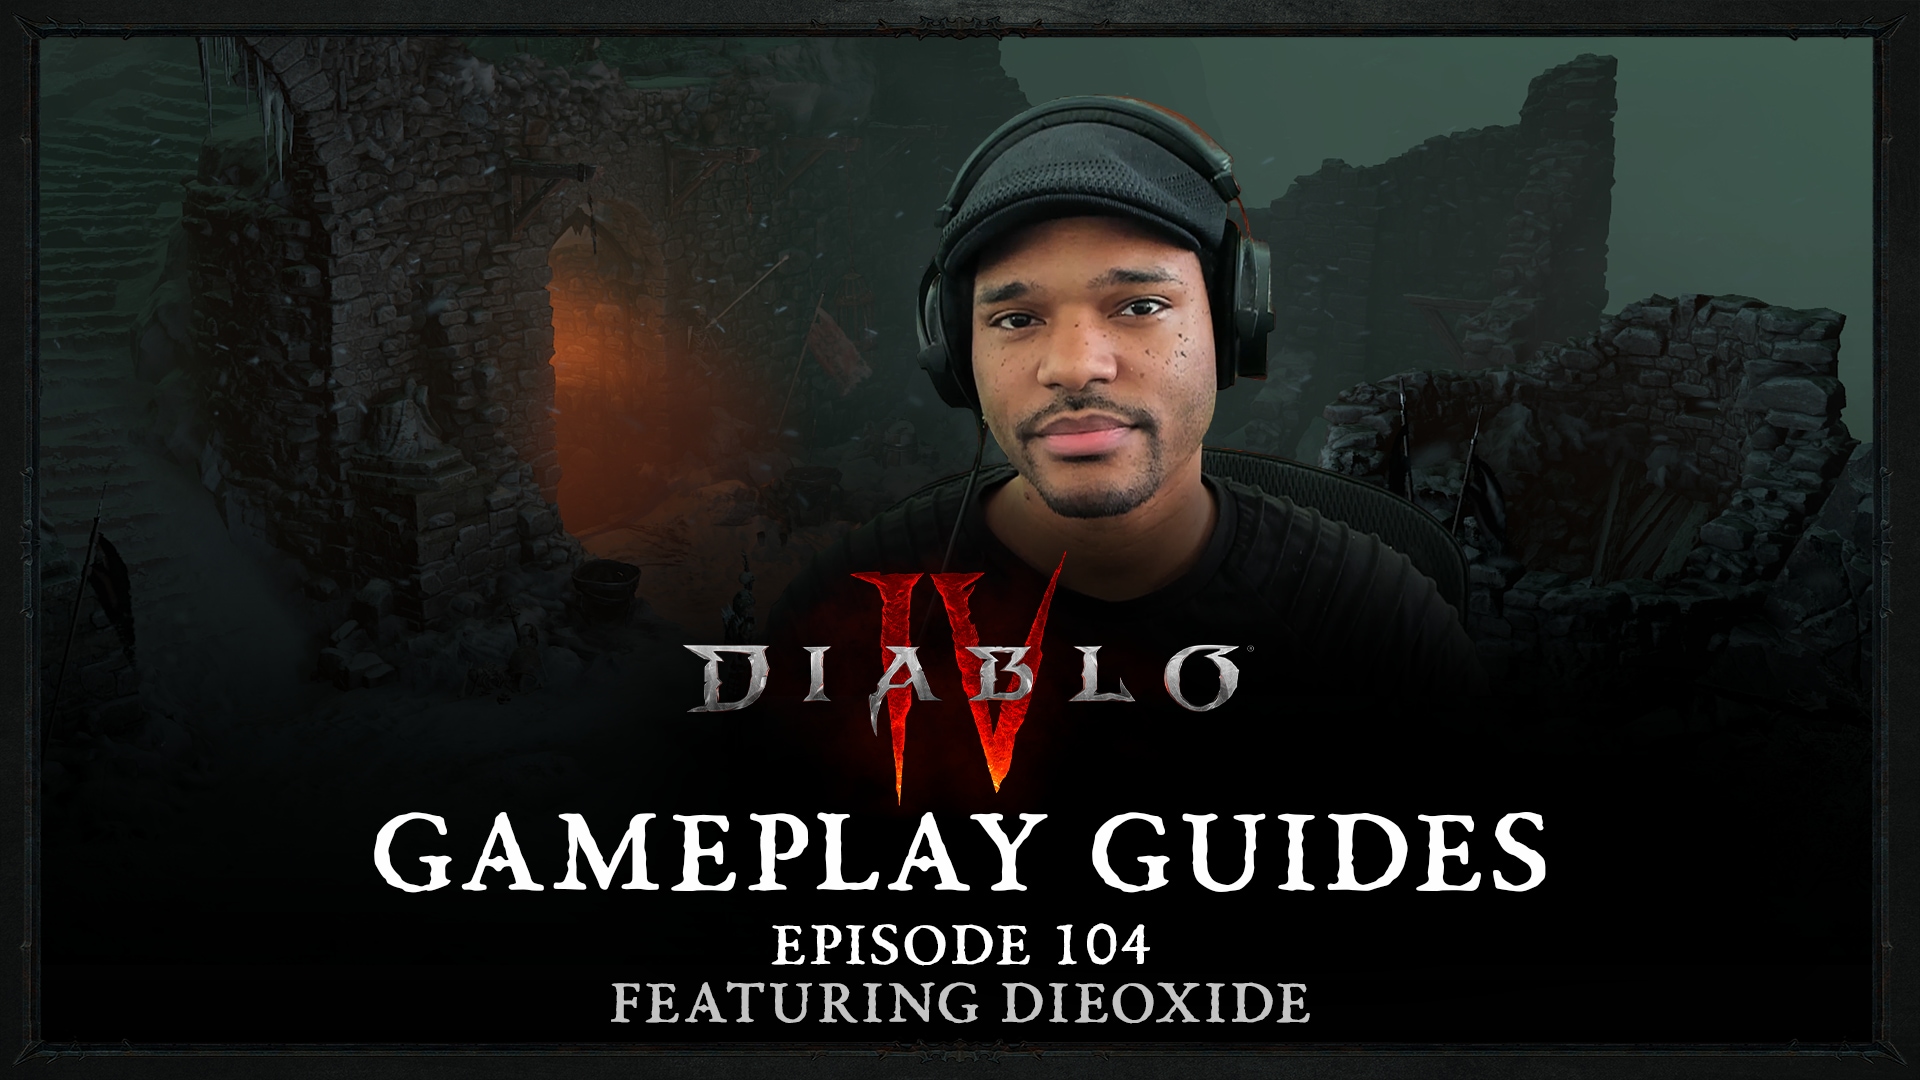 Your guide to Diablo IV’s gameplay